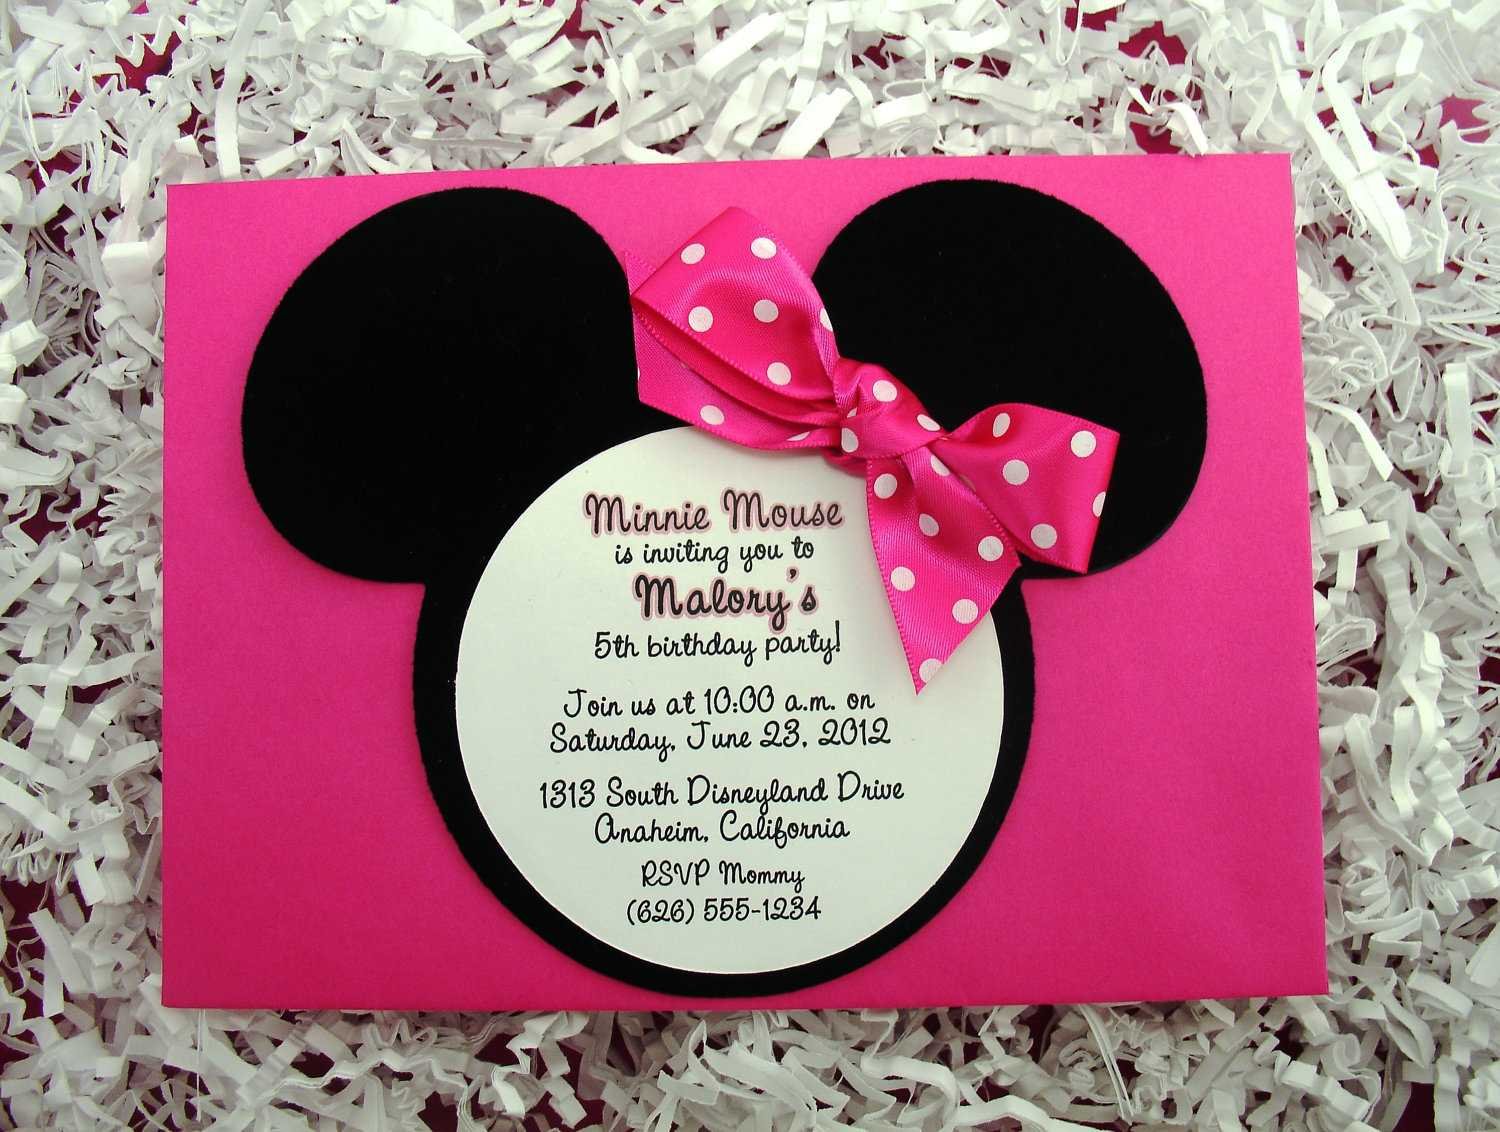 Minnie Mouse Birthday Party Invitations Minnie Mouse Birthday